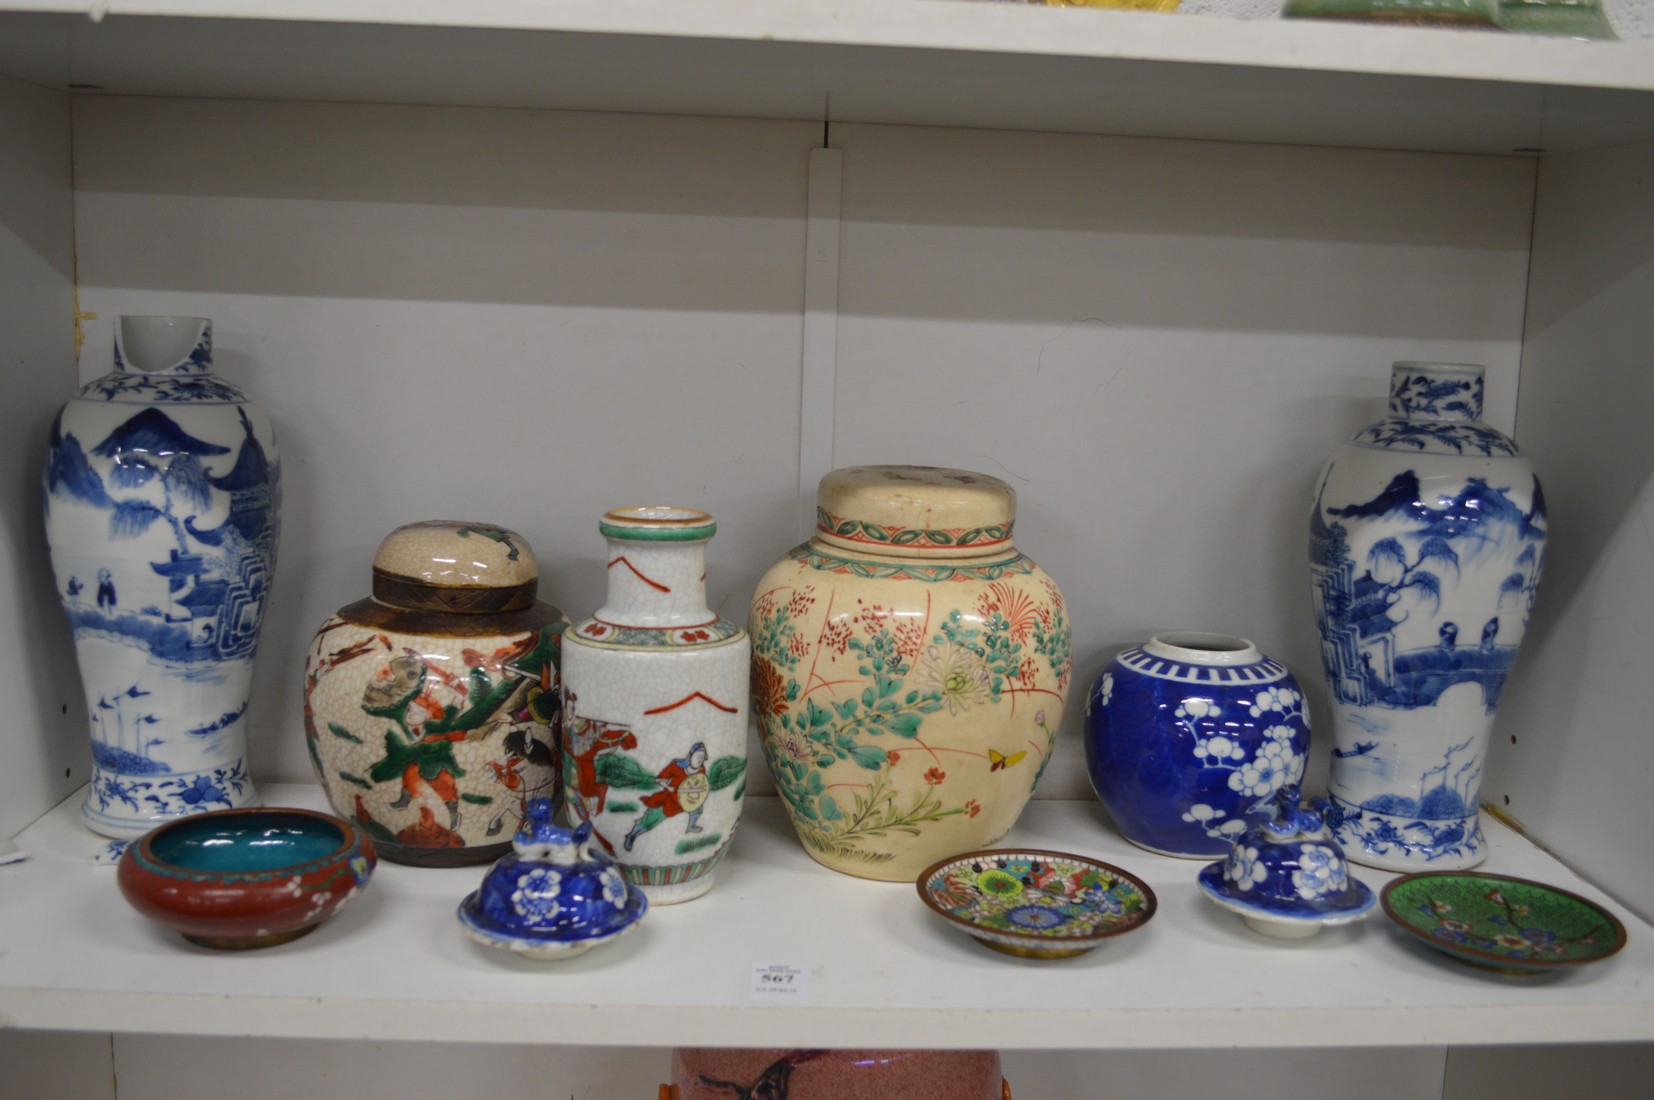 A shelf of Oriental porcelain and cloisonne items.